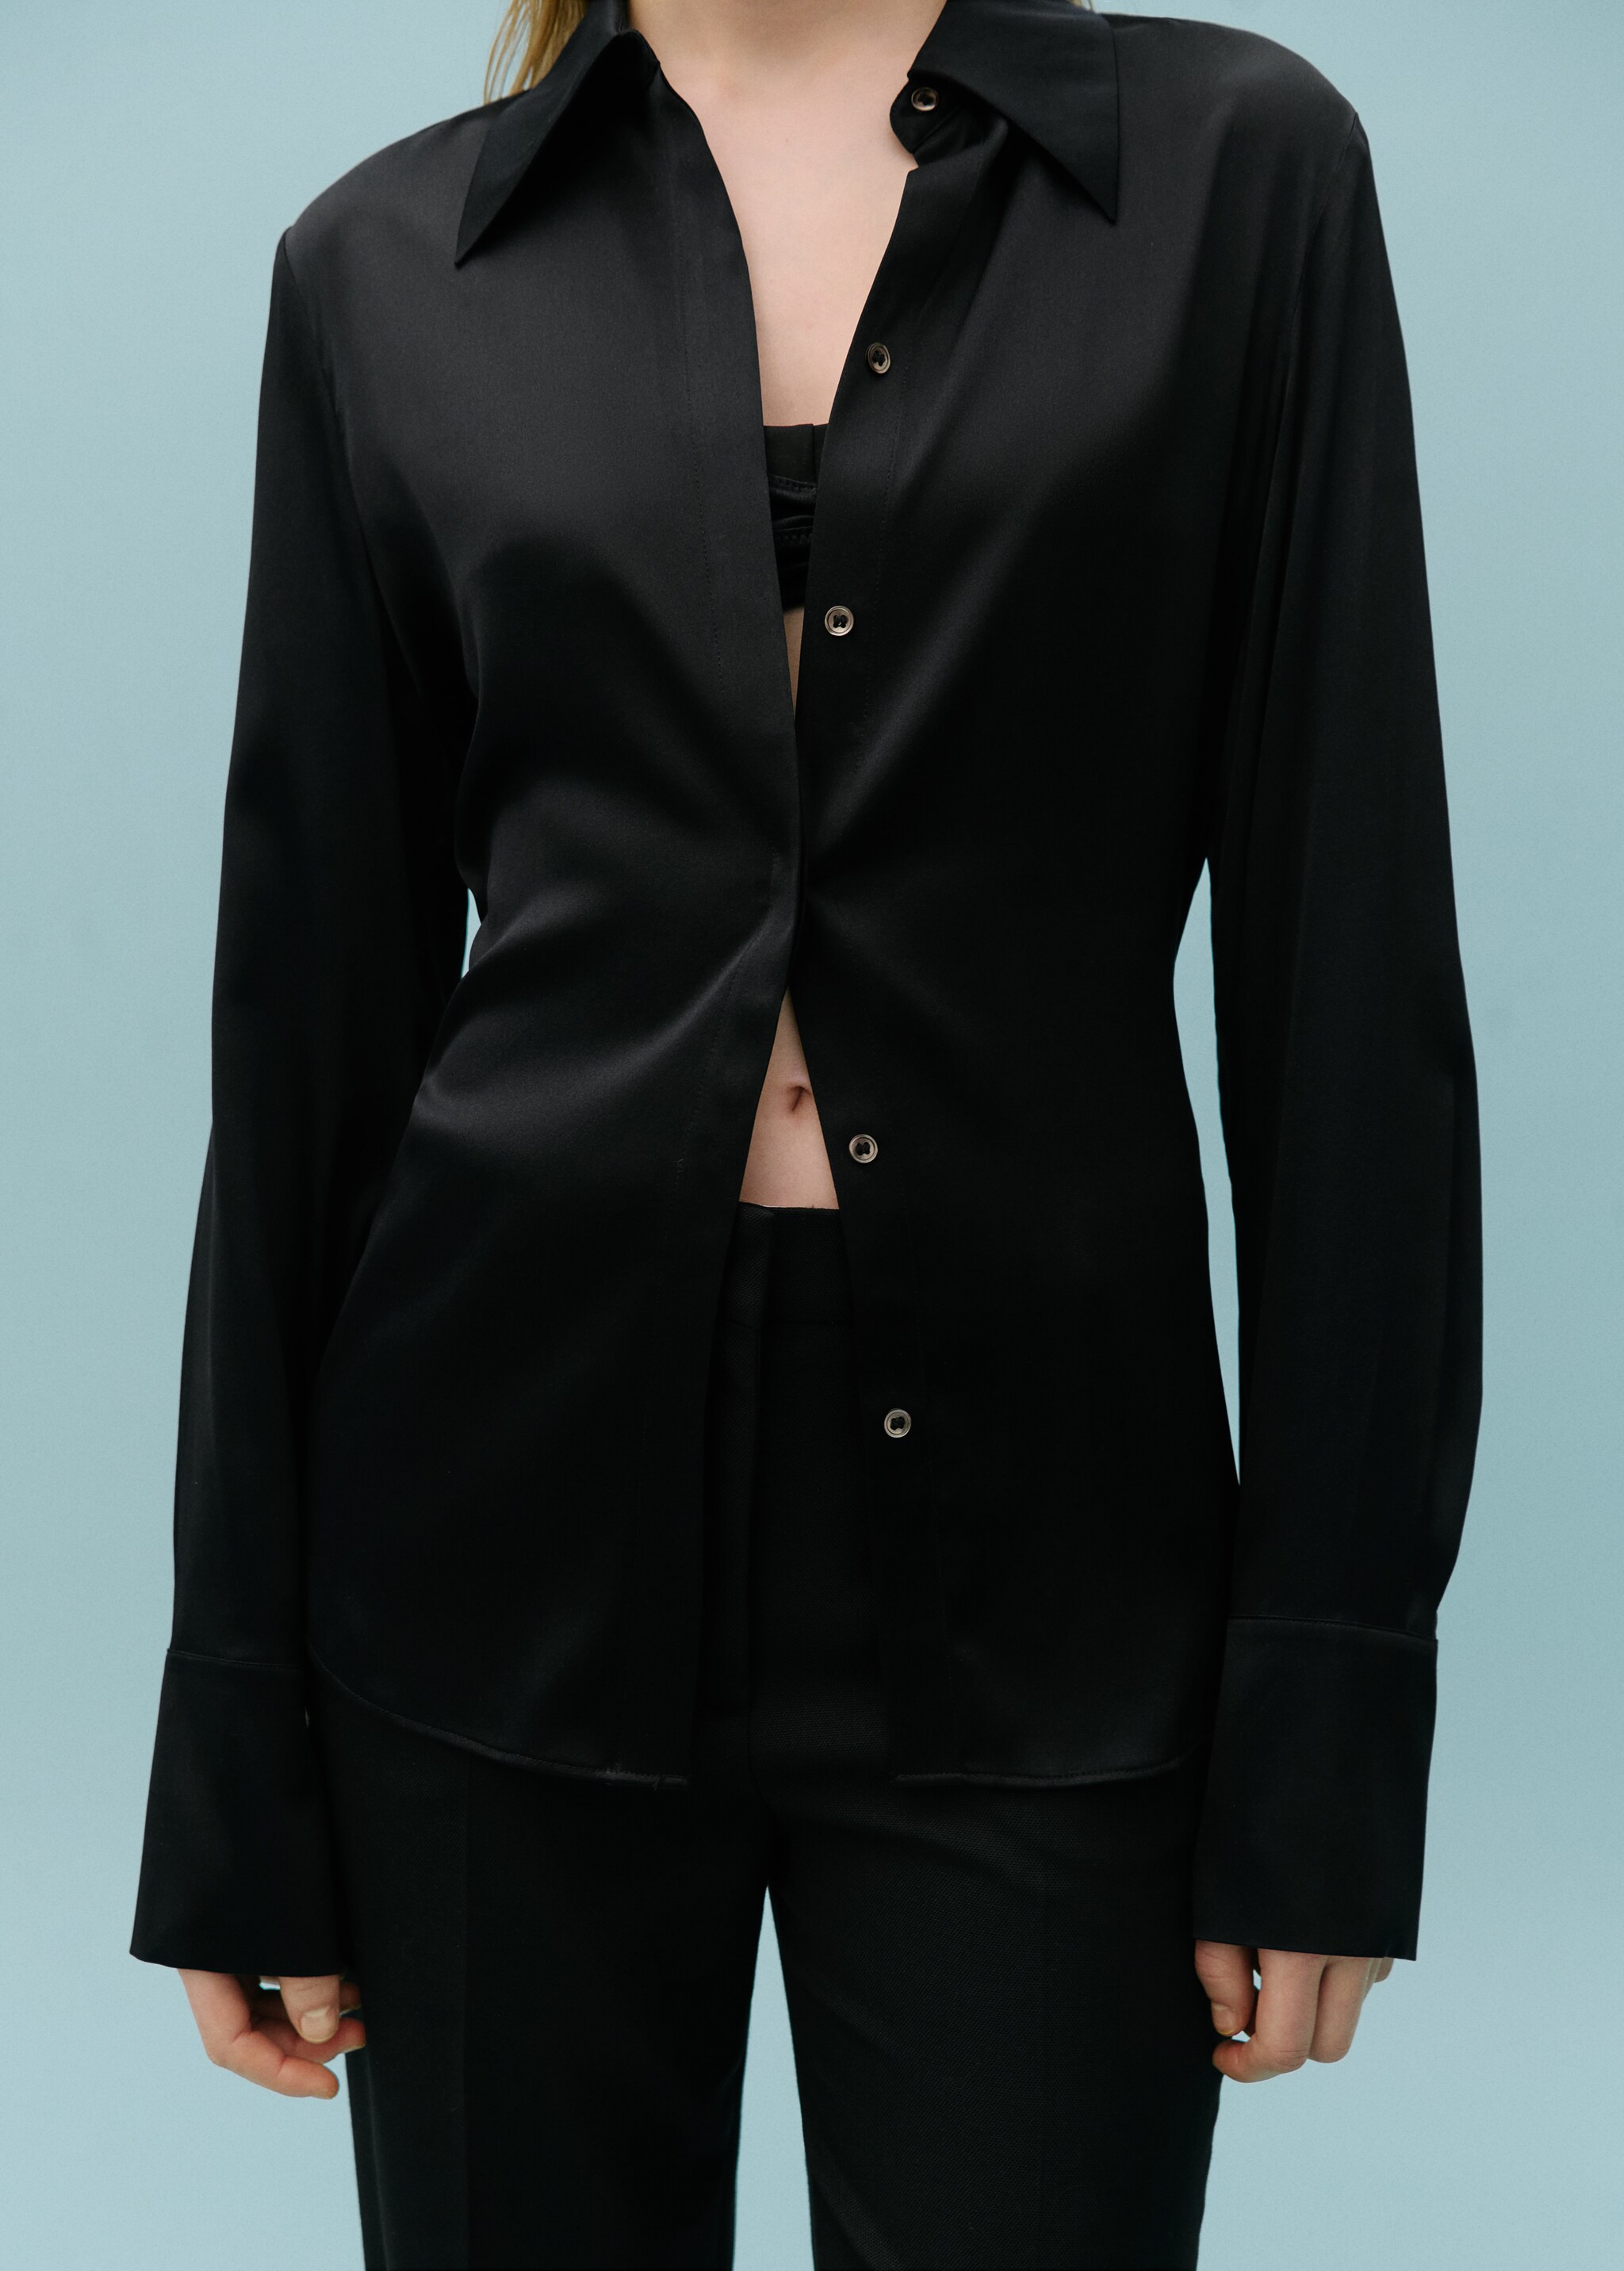 Satin silk shirt - Details of the article 6